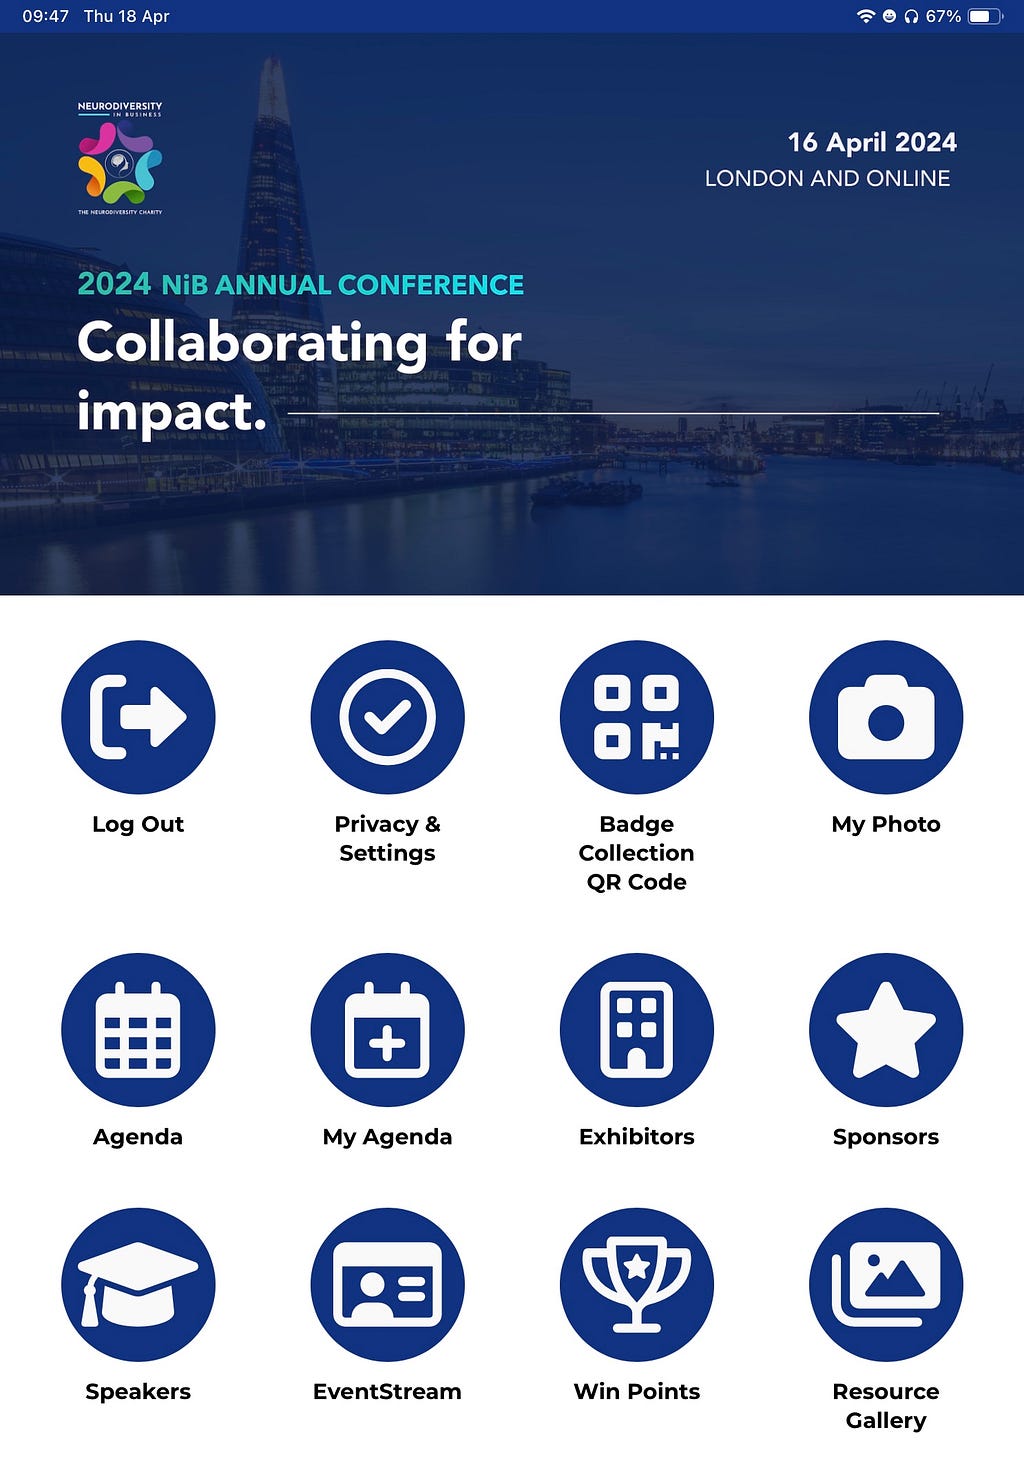 16th April 2024, London and online, 2024 NIB Annual Conference, Collaborating for impact, Buttons for event app e.g. Log out Badge collection QR code, Agenda, My agenda, exhibitors, Sponsors, Speakers, Event stream, Win points, Resource gallery